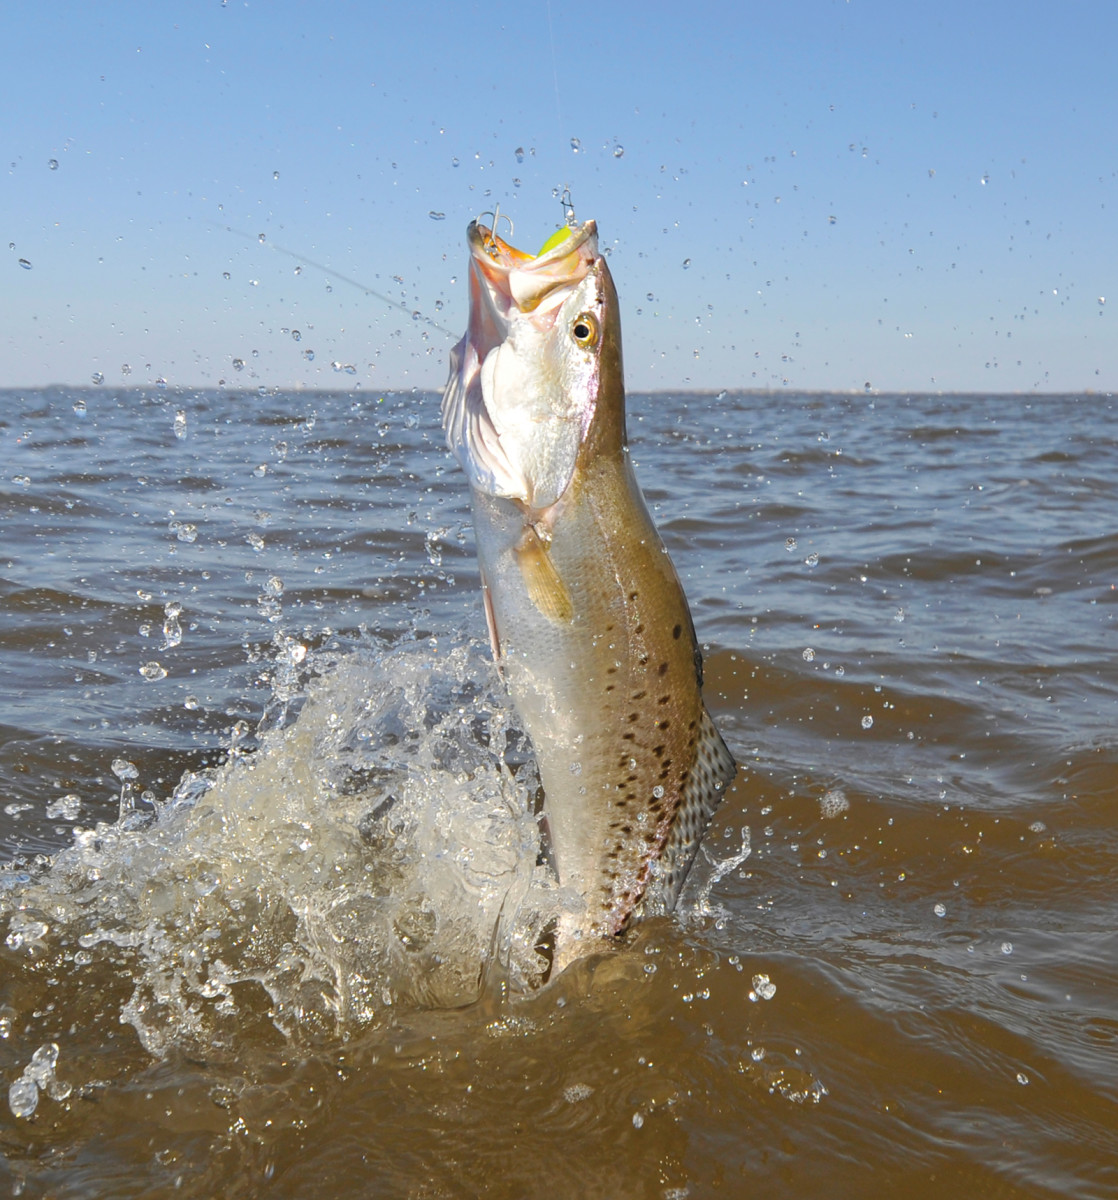 The bite, the head shakes, the jumps... seatrout put up a fight that leaves anglers thirsty for more. Photo by Will Drost.